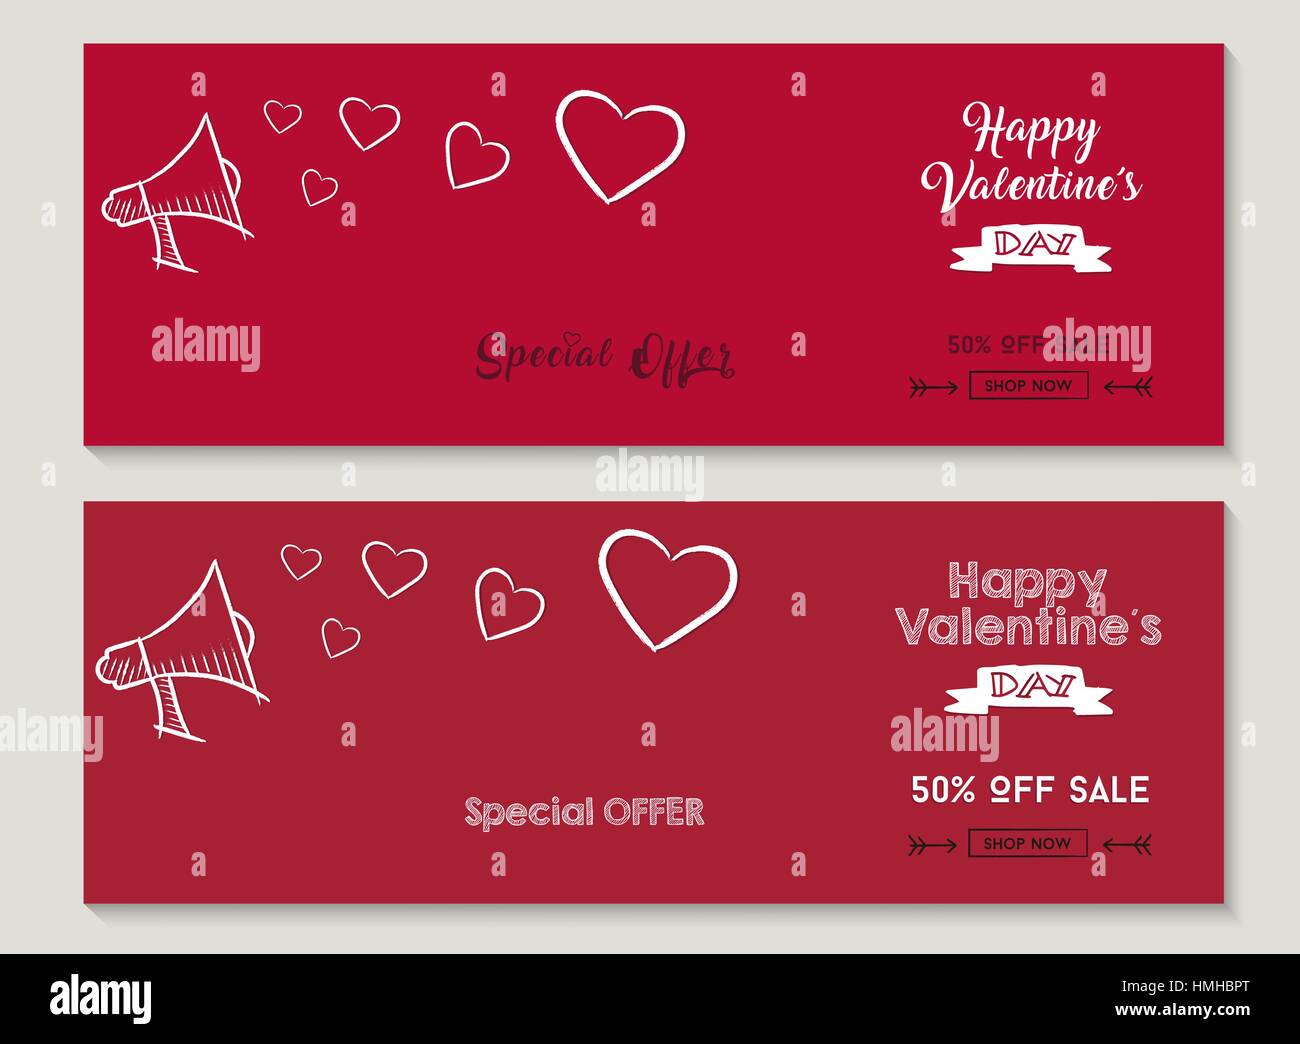 Valentines day set of special sale designs, red color discount social media cover templates for business or shop holiday with hand drawn elements. Stock Vector